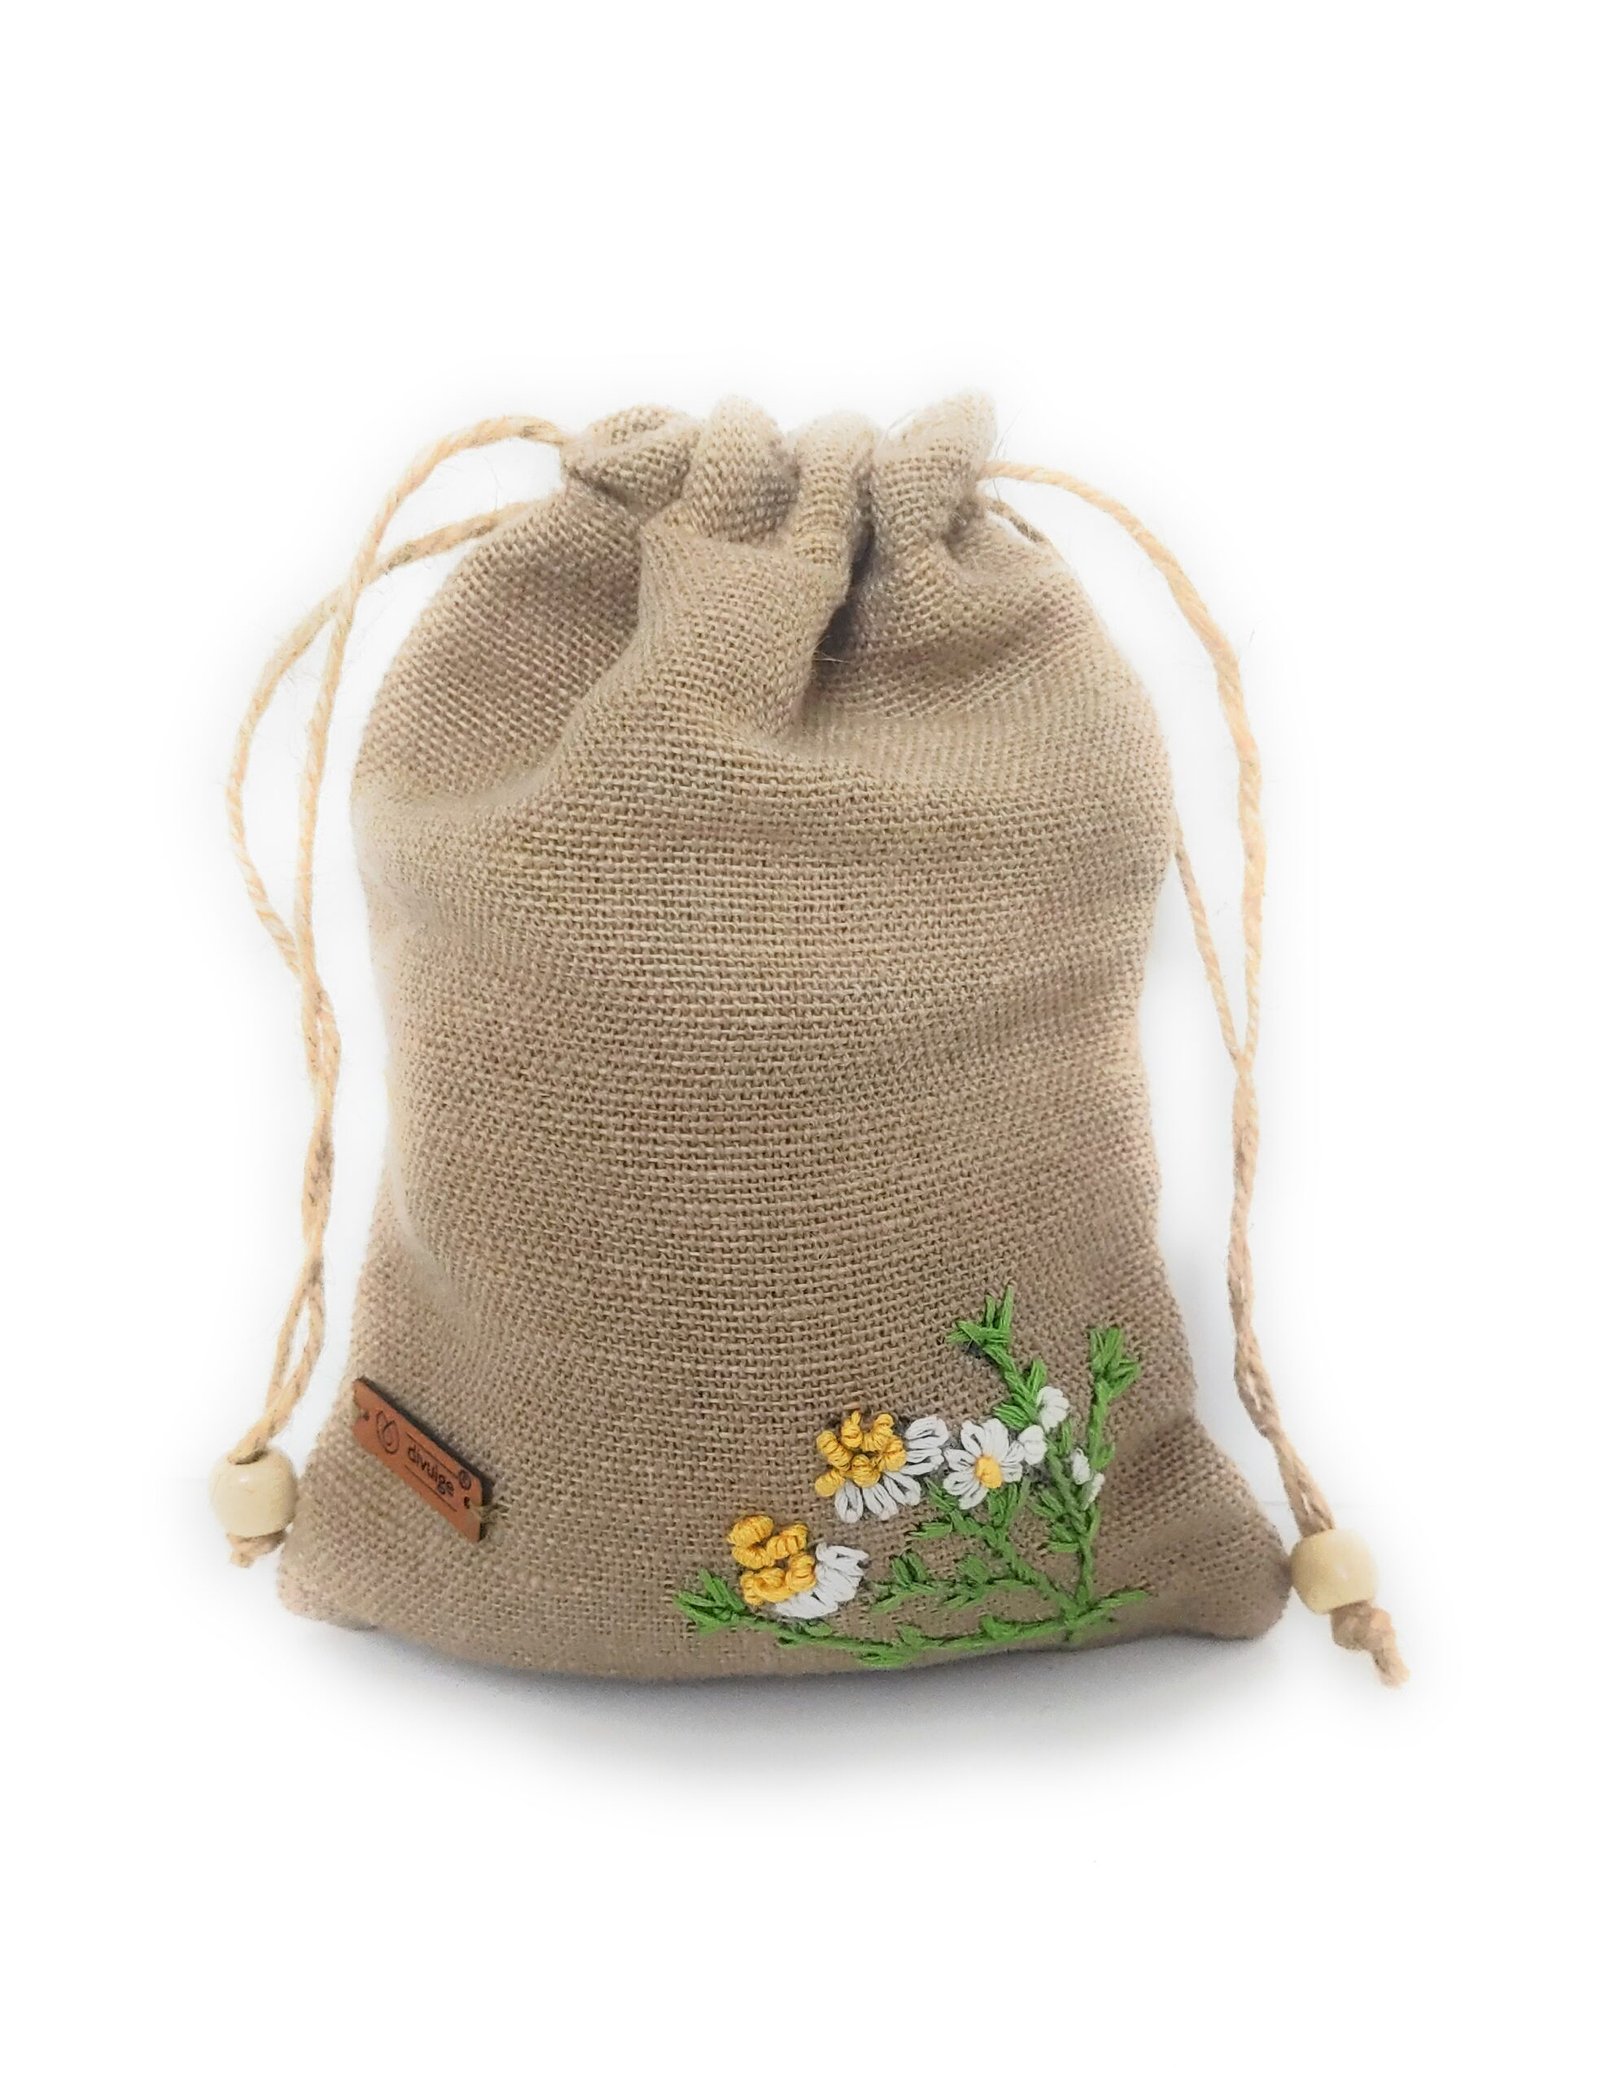 DIVULGE Natural Jute Color Drawstring Gift Bags, Gift bags With Hand Embroidery, Return Gift Bags, Burlap Gift bags for Festivals, Theme Wedding, Rice ceremony, Parties,and more.